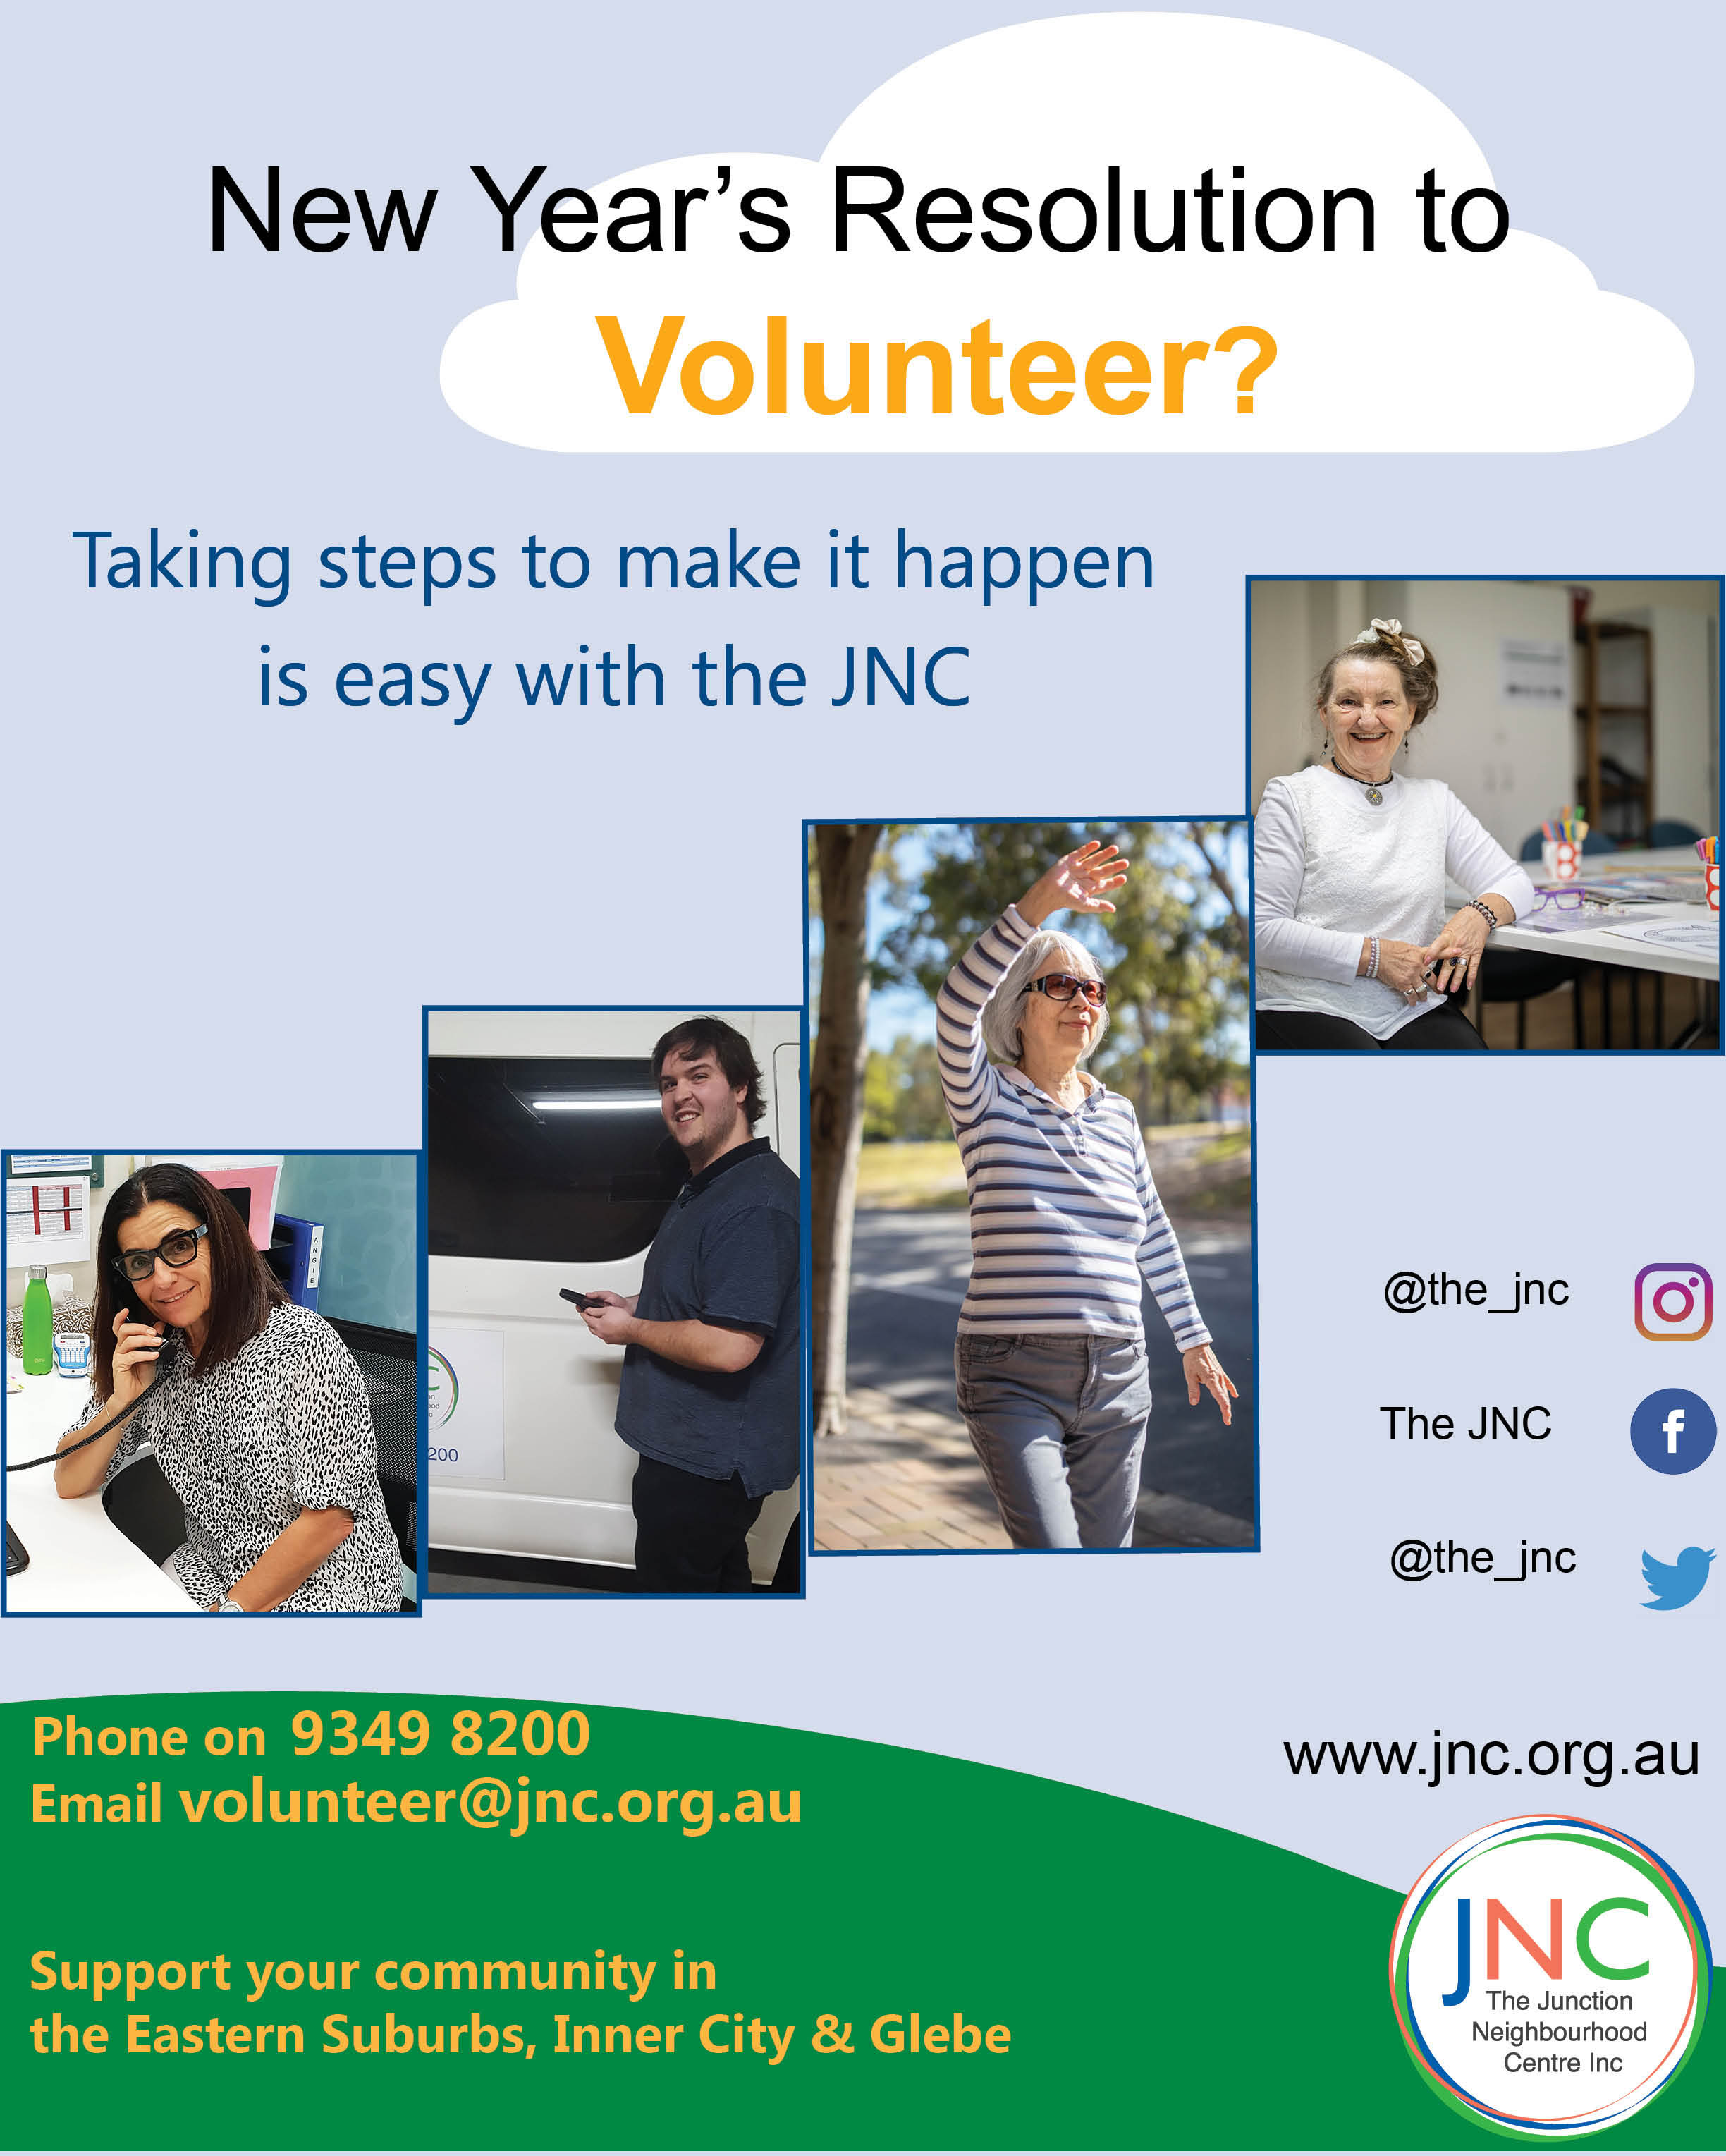 poster enoffering people the cnace to carry out their New Year's resolution to volunteer